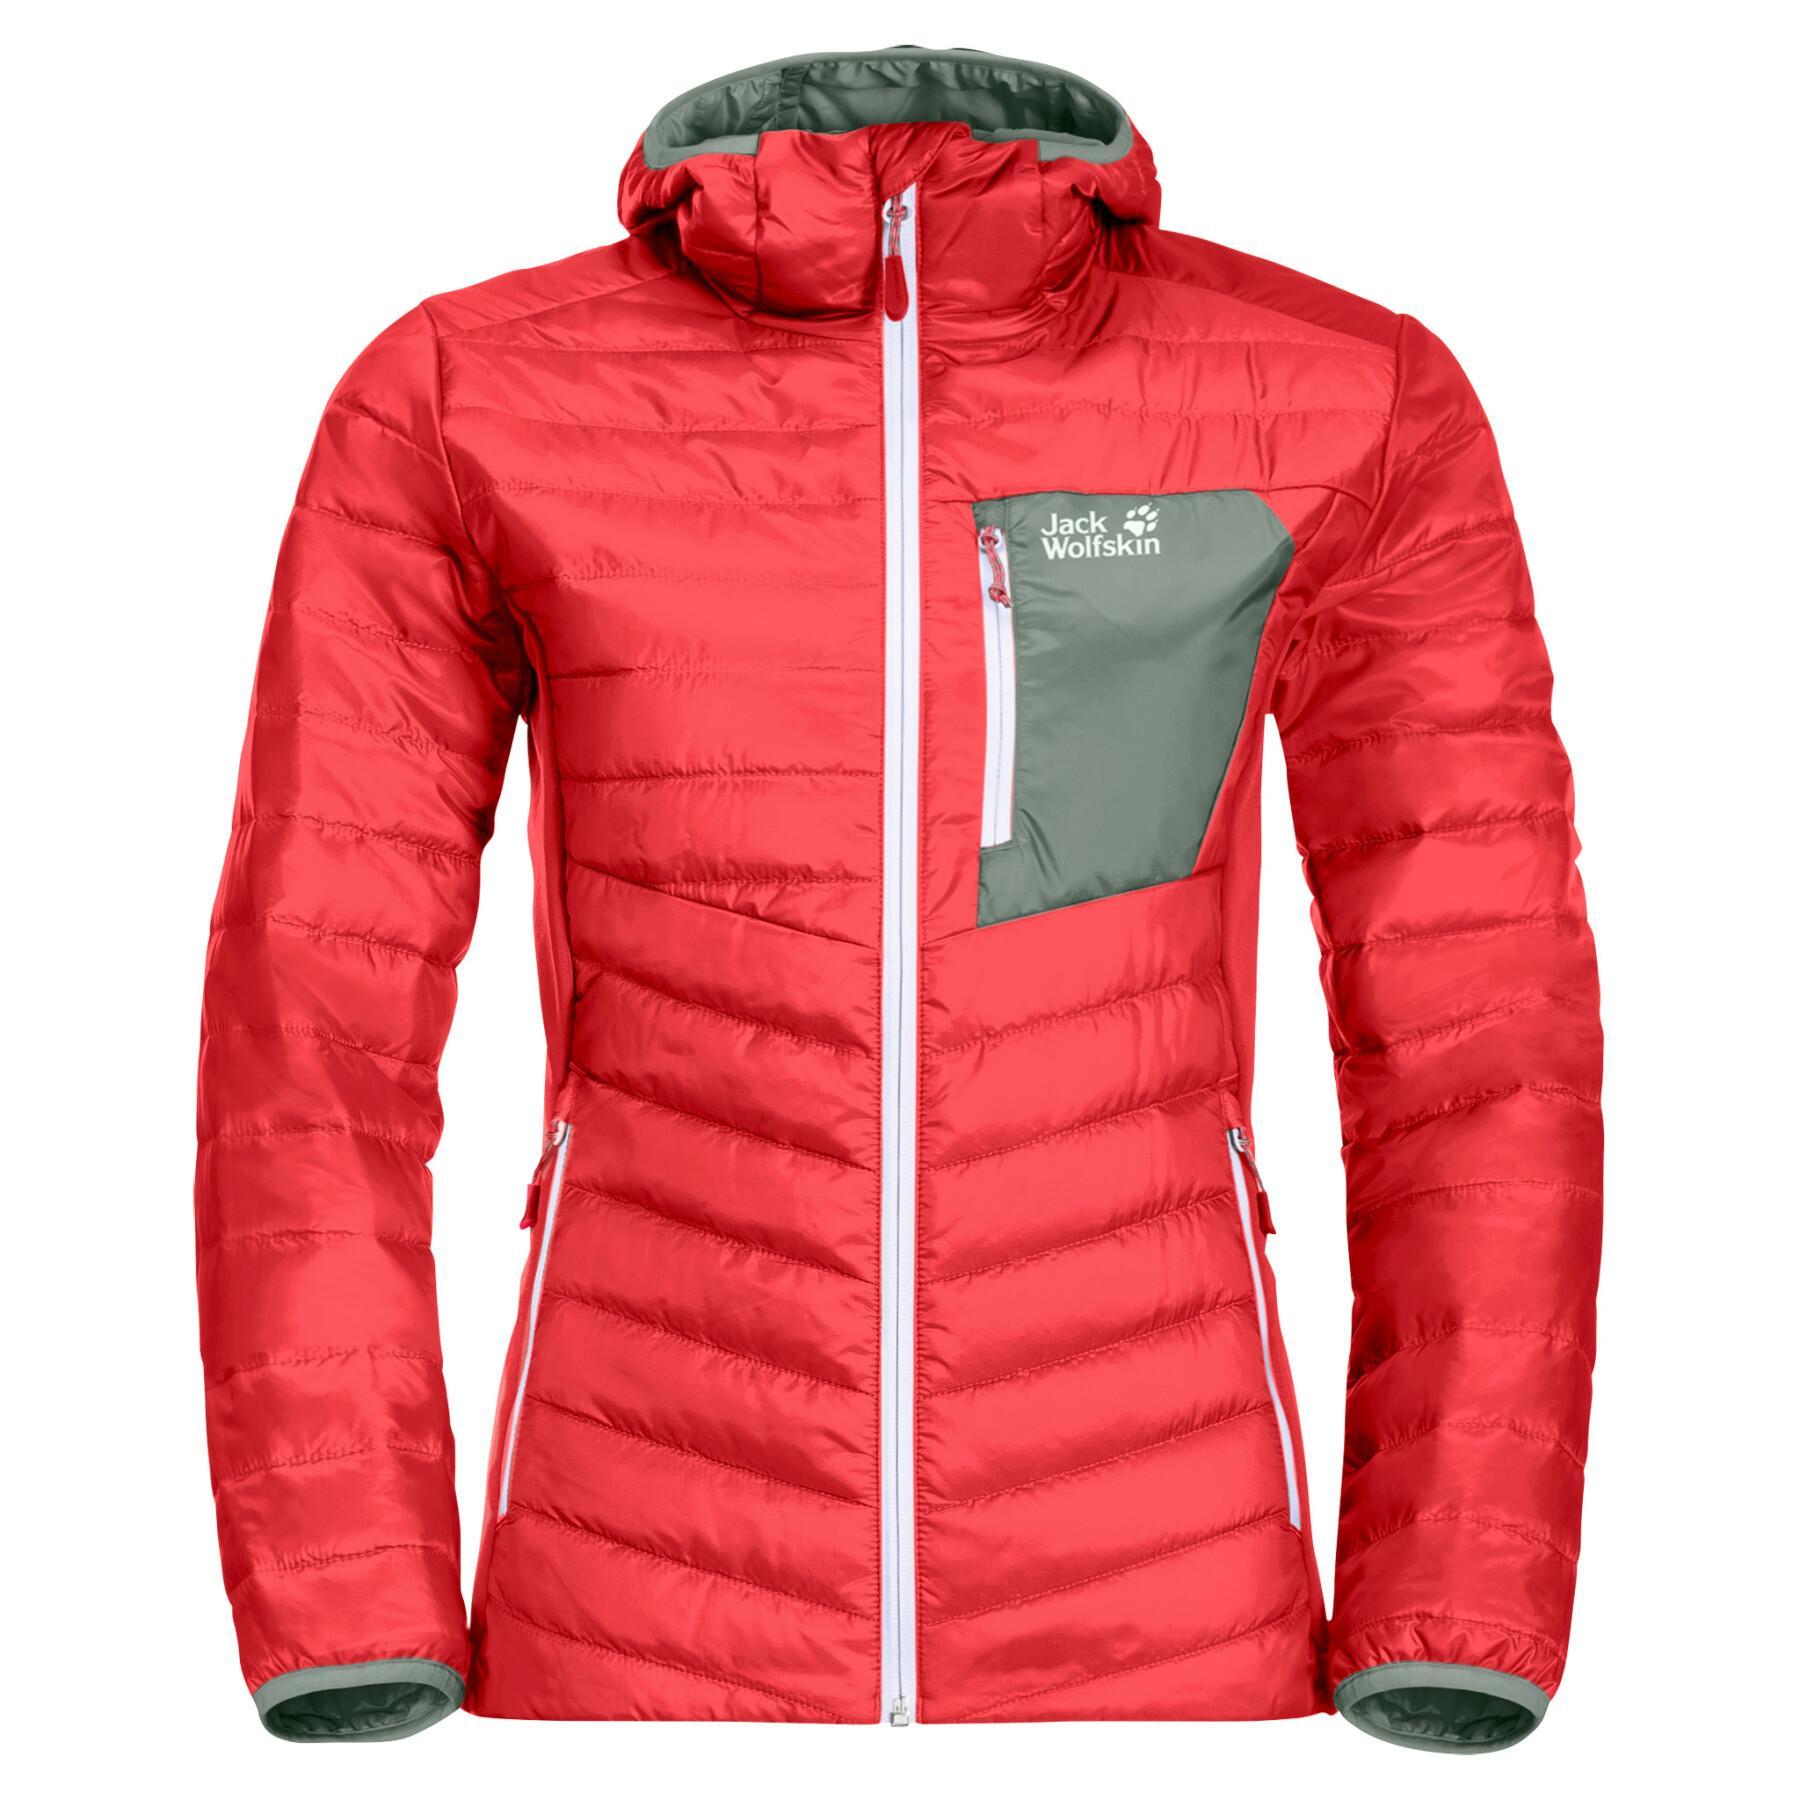 Chaqueta impermeable para mujer Jack Wolfskin Routeburn